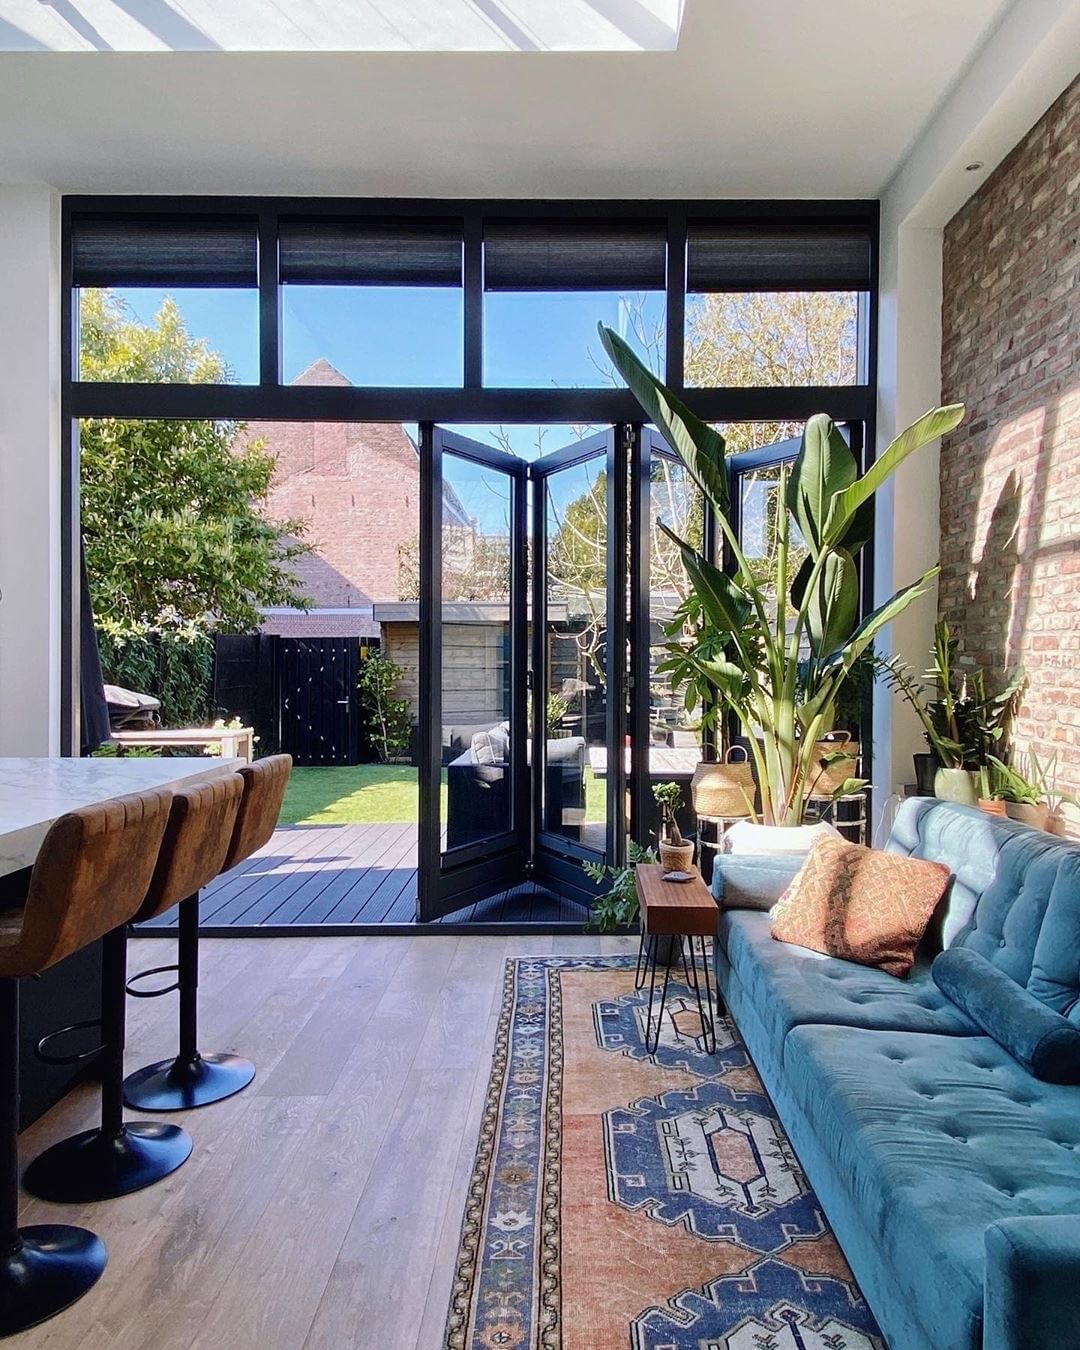 Indoor-Outdoor Living Space in a Home. Photo by Instagram user @interiorsinsideout